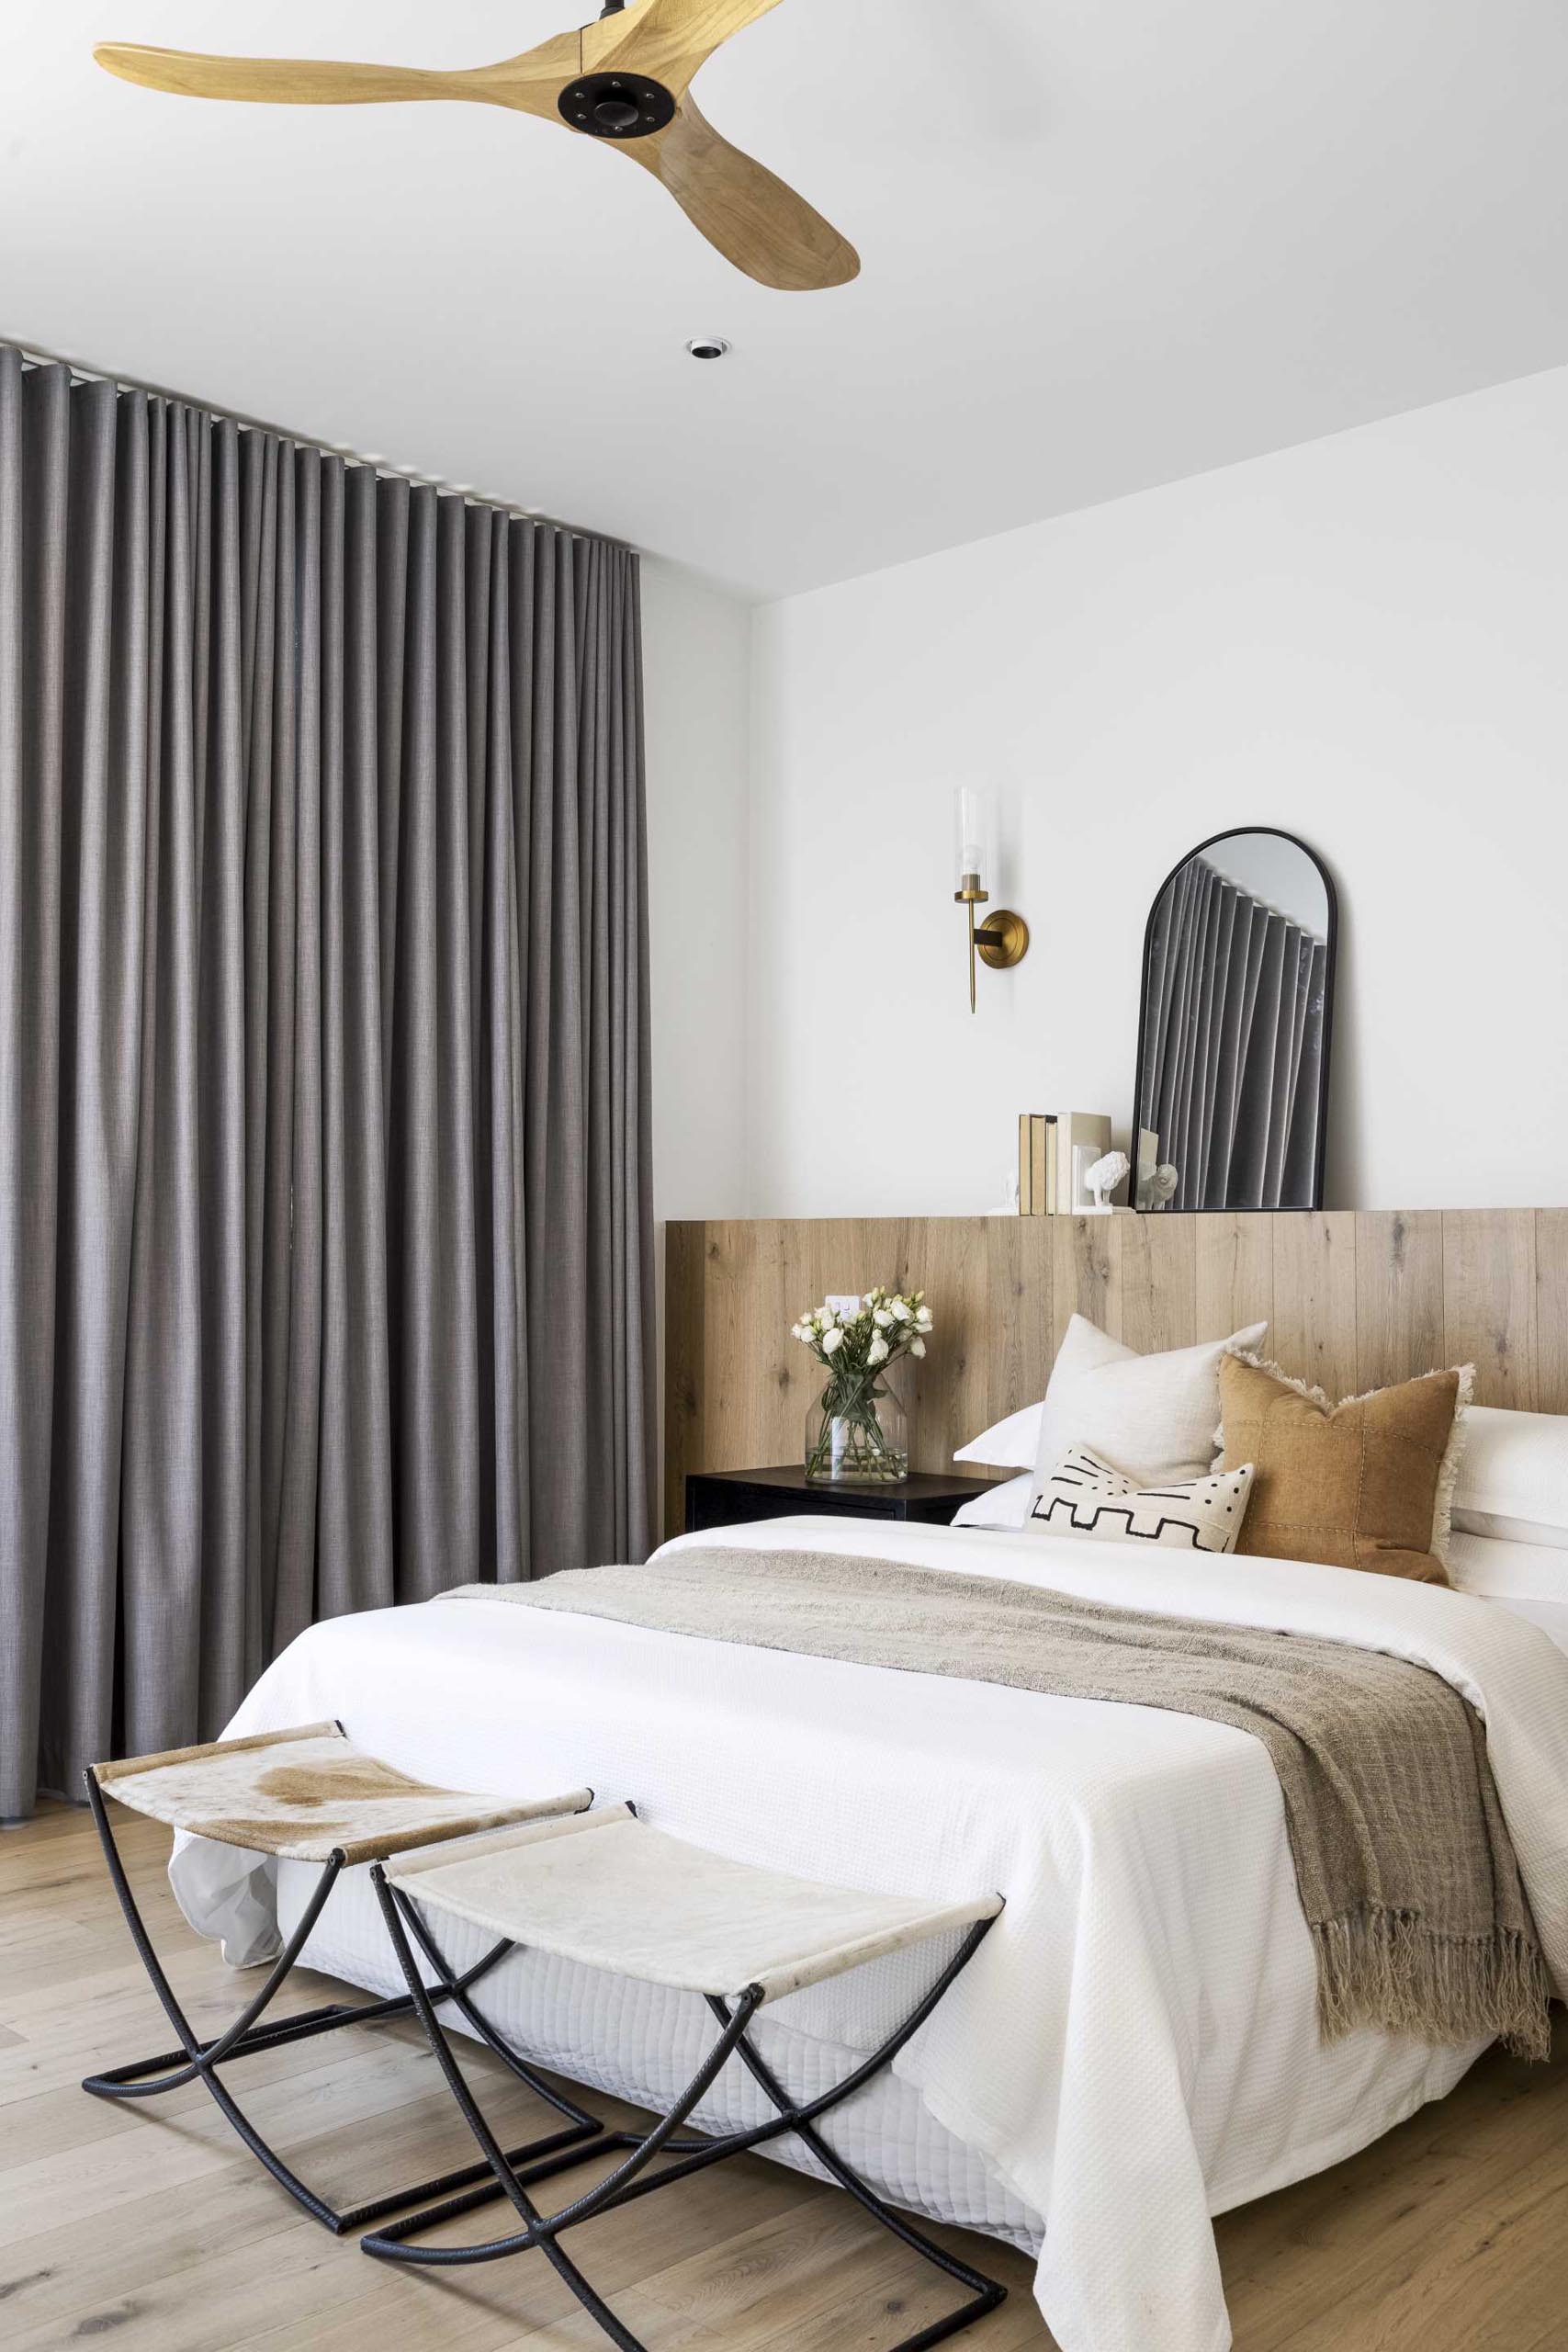 In this modern bedroom, heavy fabric curtains have been used to create a restful atmosphere, while a solid timber headboard spans the length of the back wall, and white painted walls and engineered timber floors finish off the room.